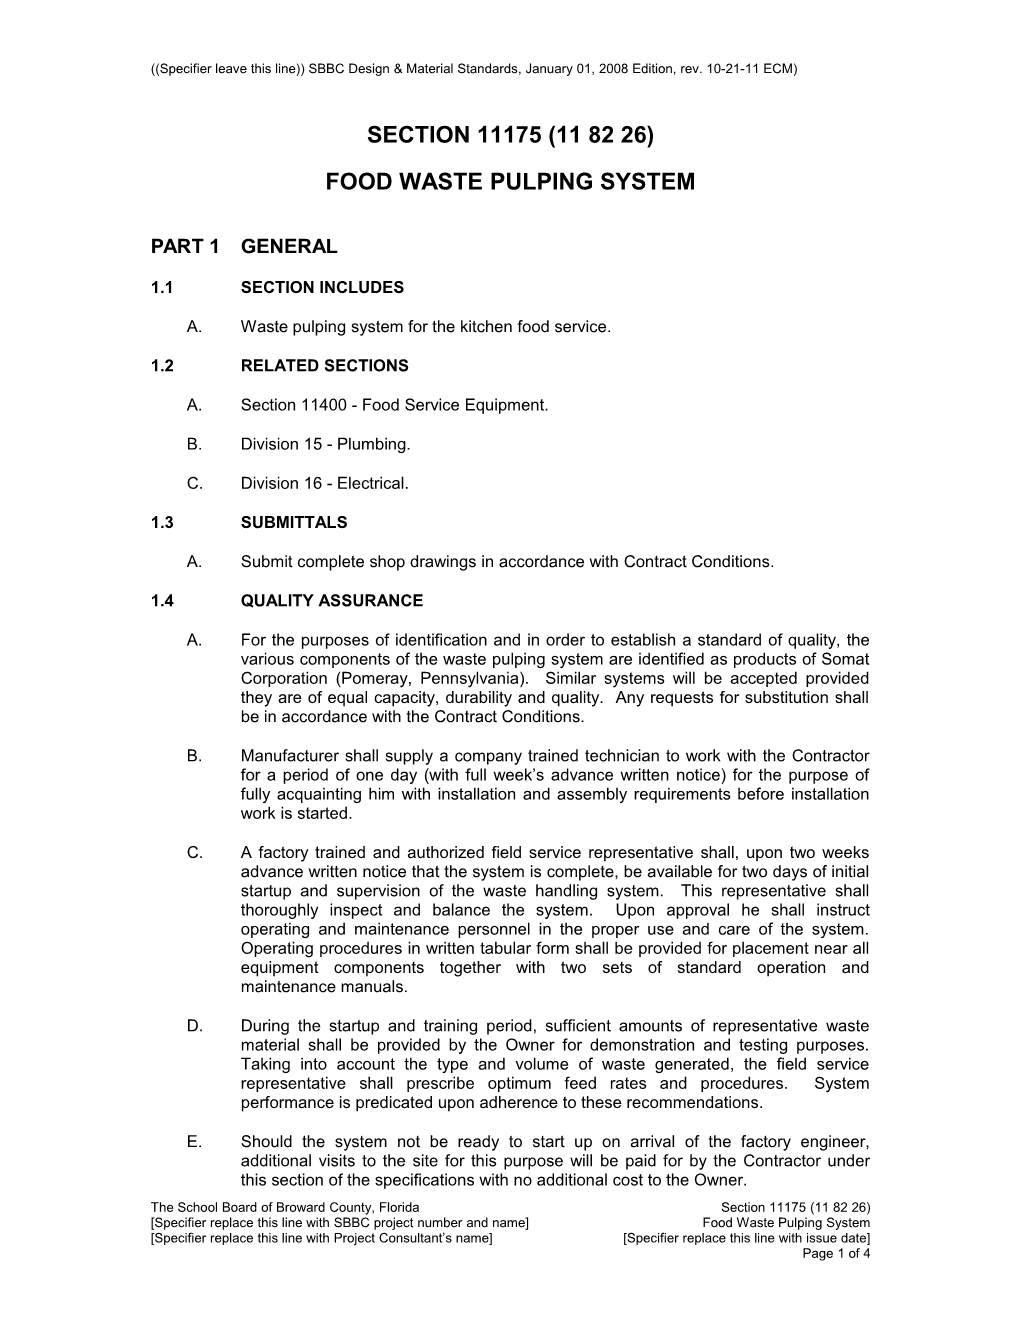 Food Waste Pulping System